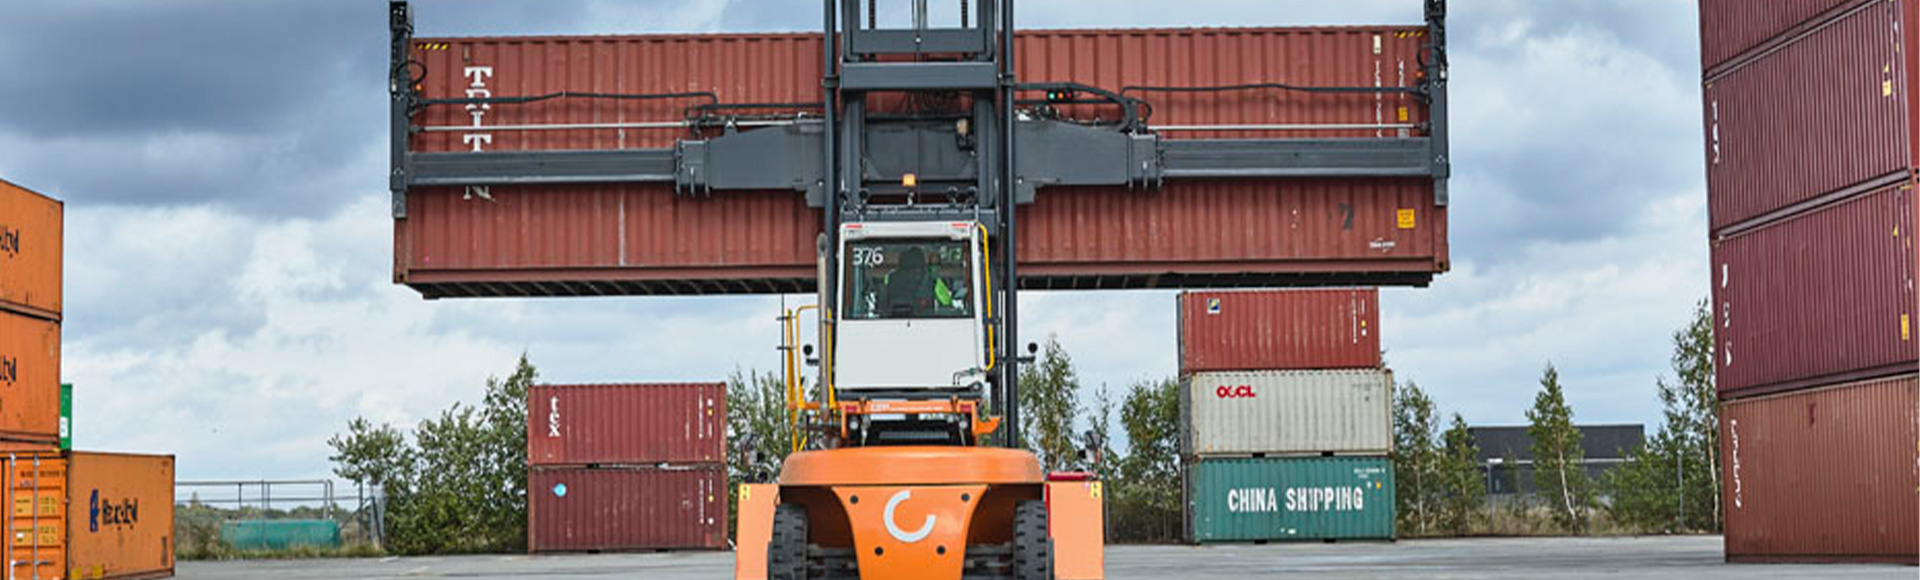 Konecranes manages the container hotel safely and effectively